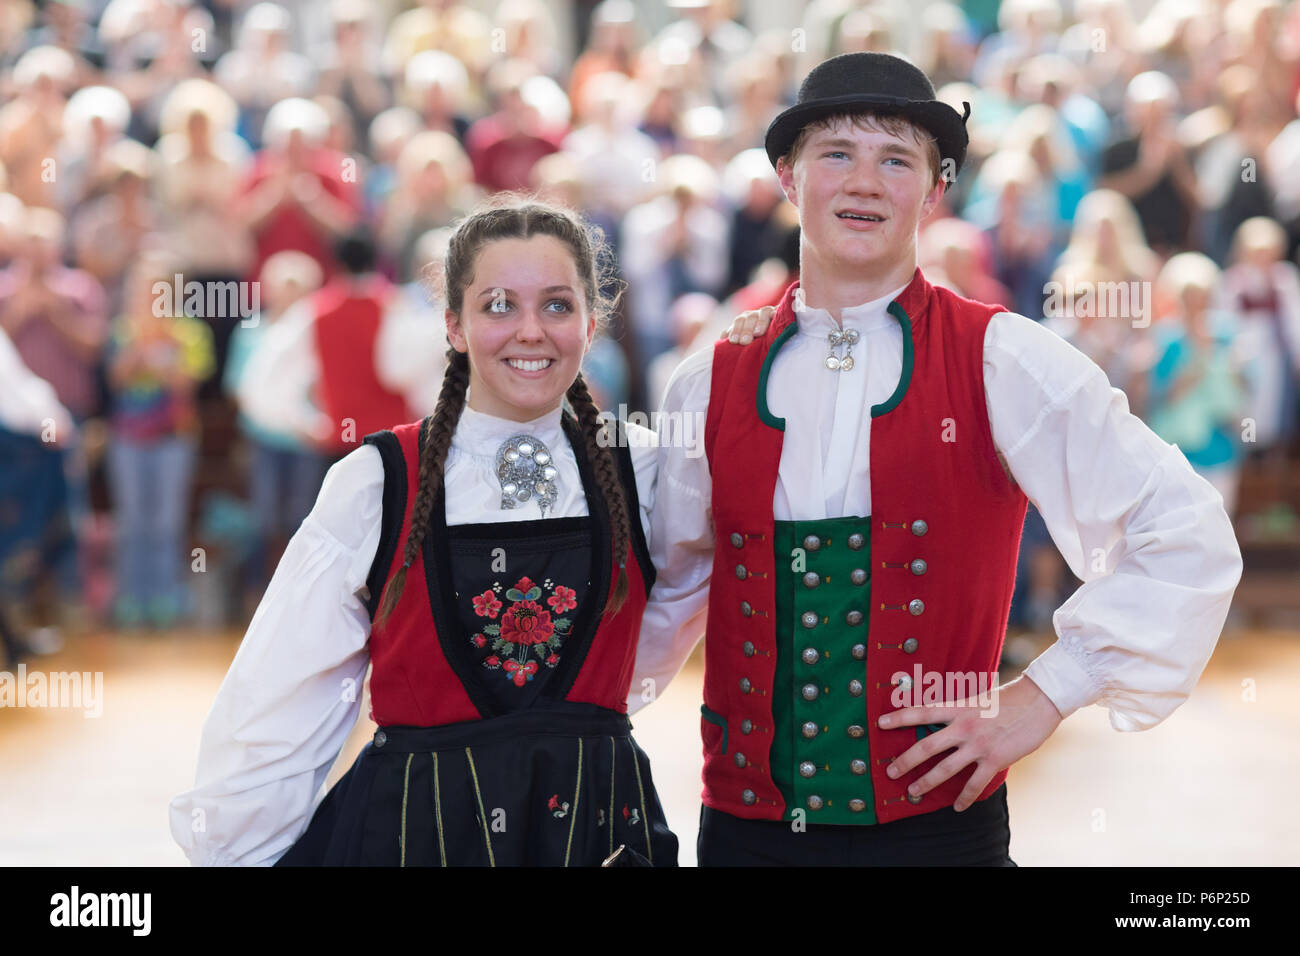 Stoughton, Wisconsin, USA - May 19, 2018 The Stoughton Norwegian Dancers,  wearing traditional clothing from norway, perform traditional dances at the  Stock Photo - Alamy